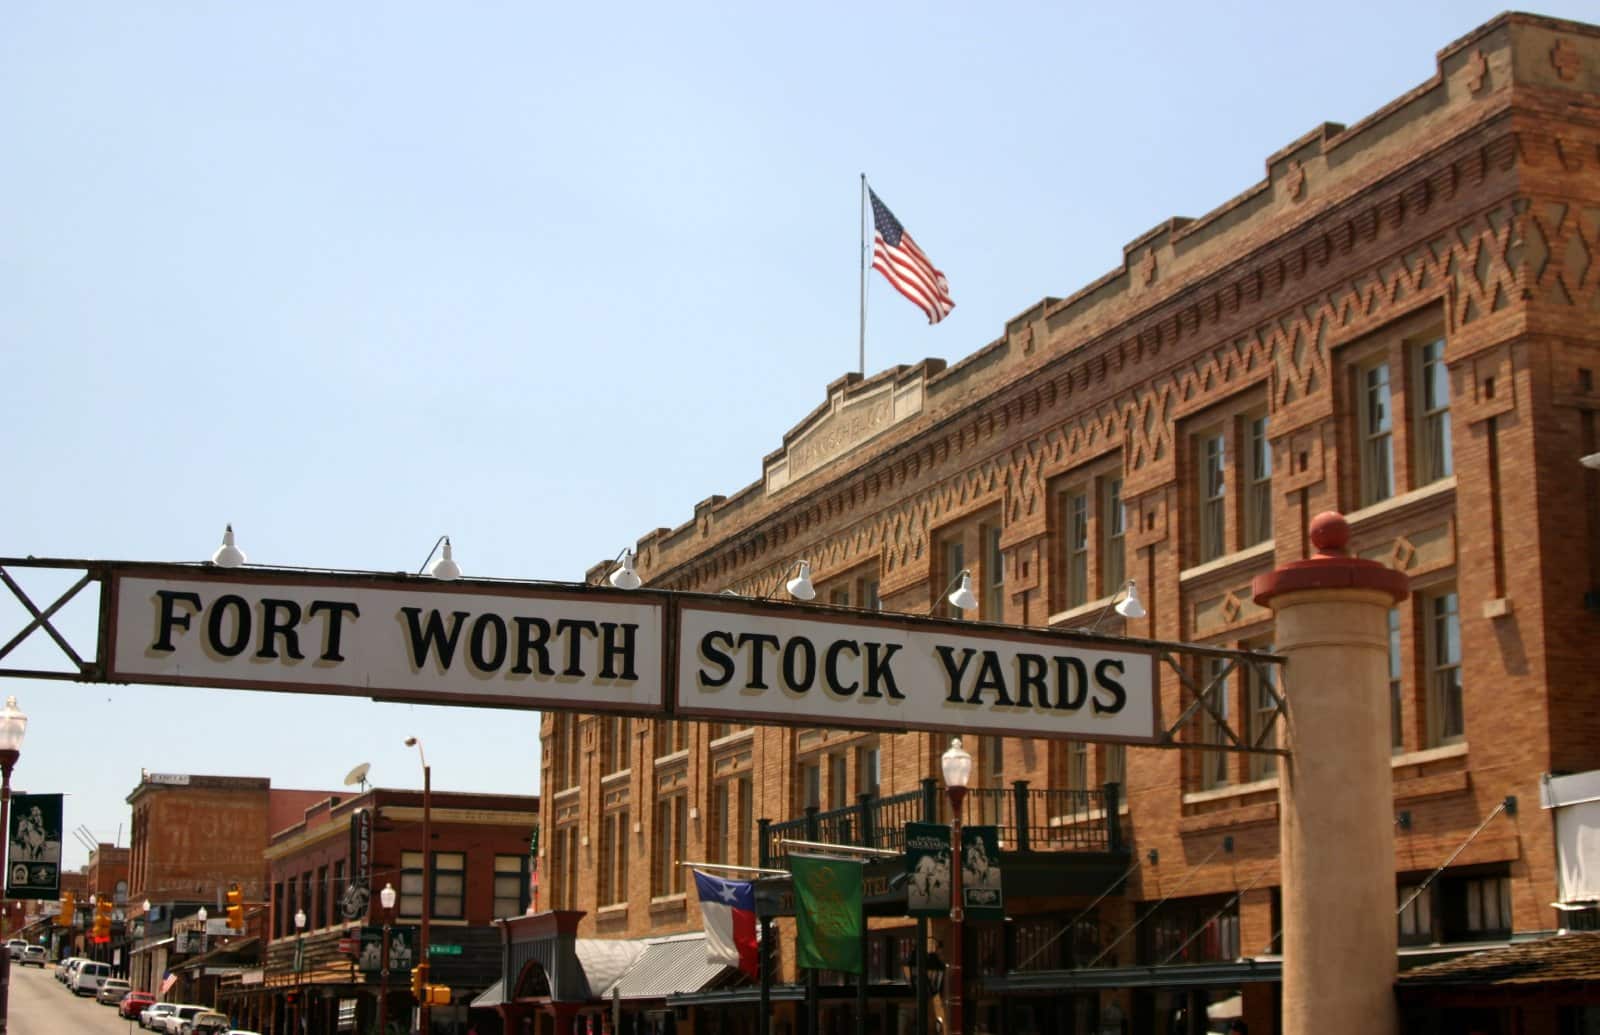 <p><span>Immerse yourself in the Wild West at the Stockyards, where you can witness a cattle drive, explore a cowboy hall of fame, and dine at historic saloons. Most attractions are free, but experiences like rodeos and concerts might cost around $20.</span></p>